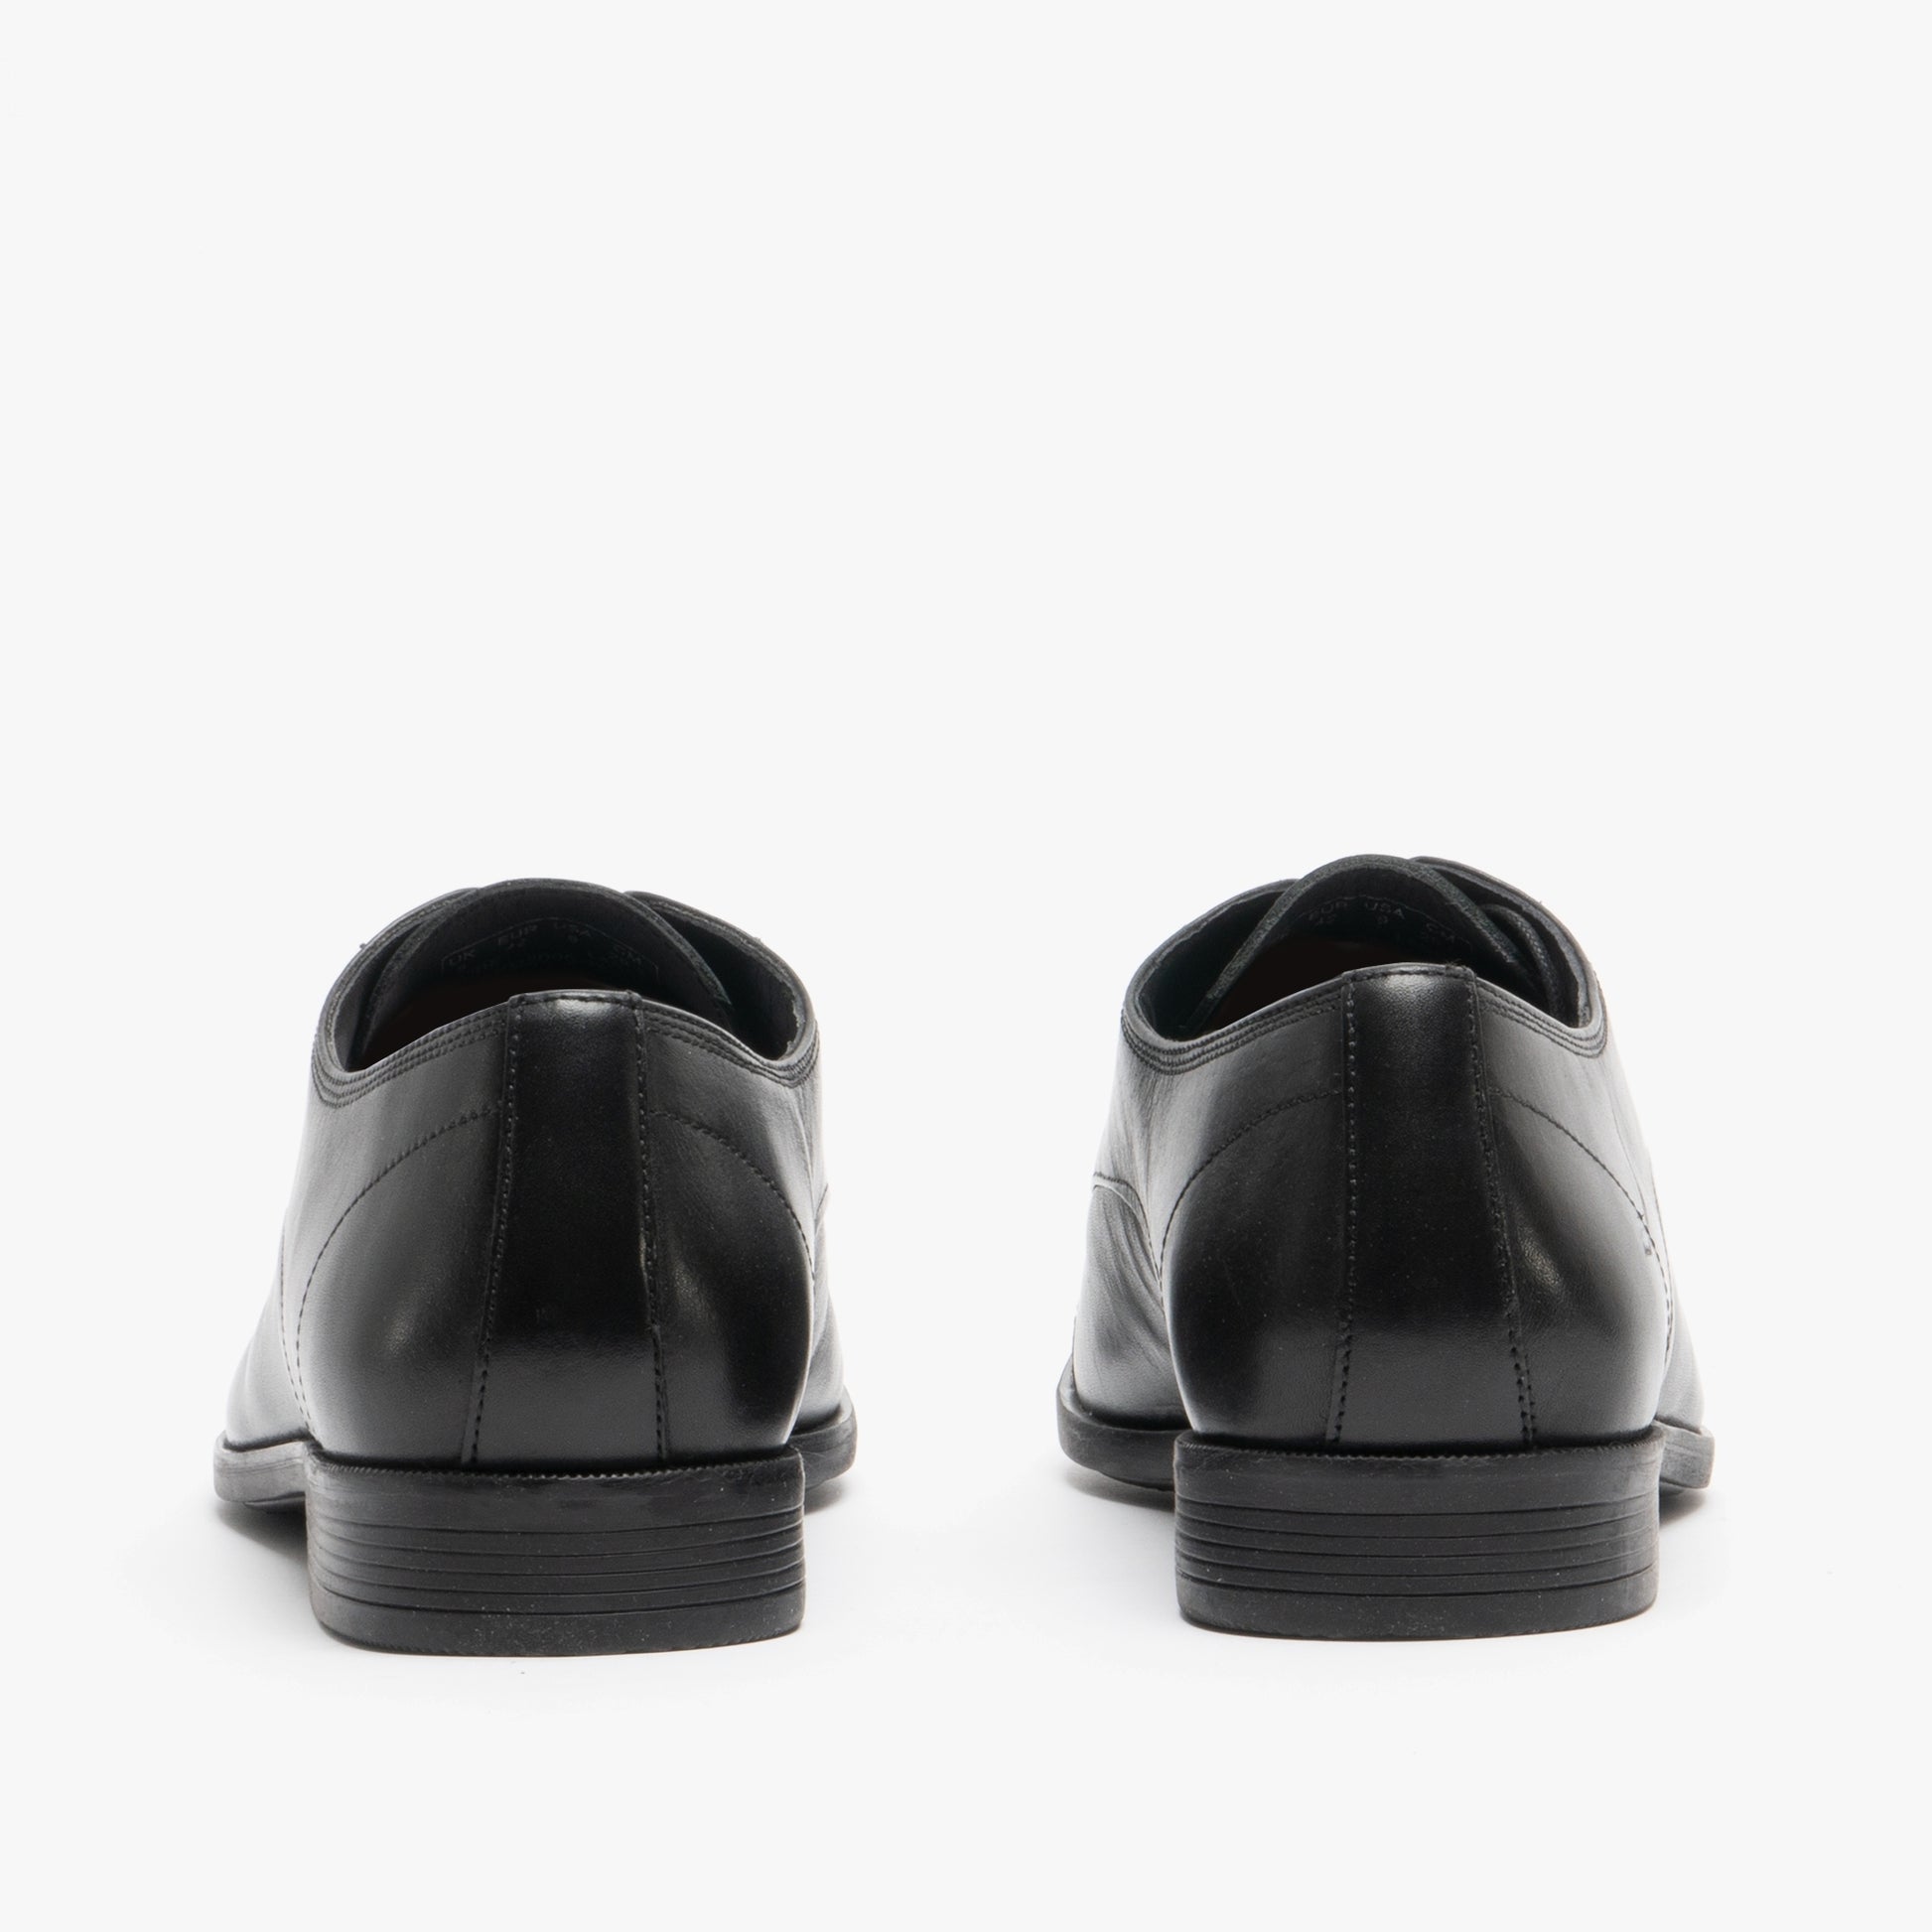 Only 45.00 usd for Hush Puppies Ollie Cap Toe Shoe Online at the Shop